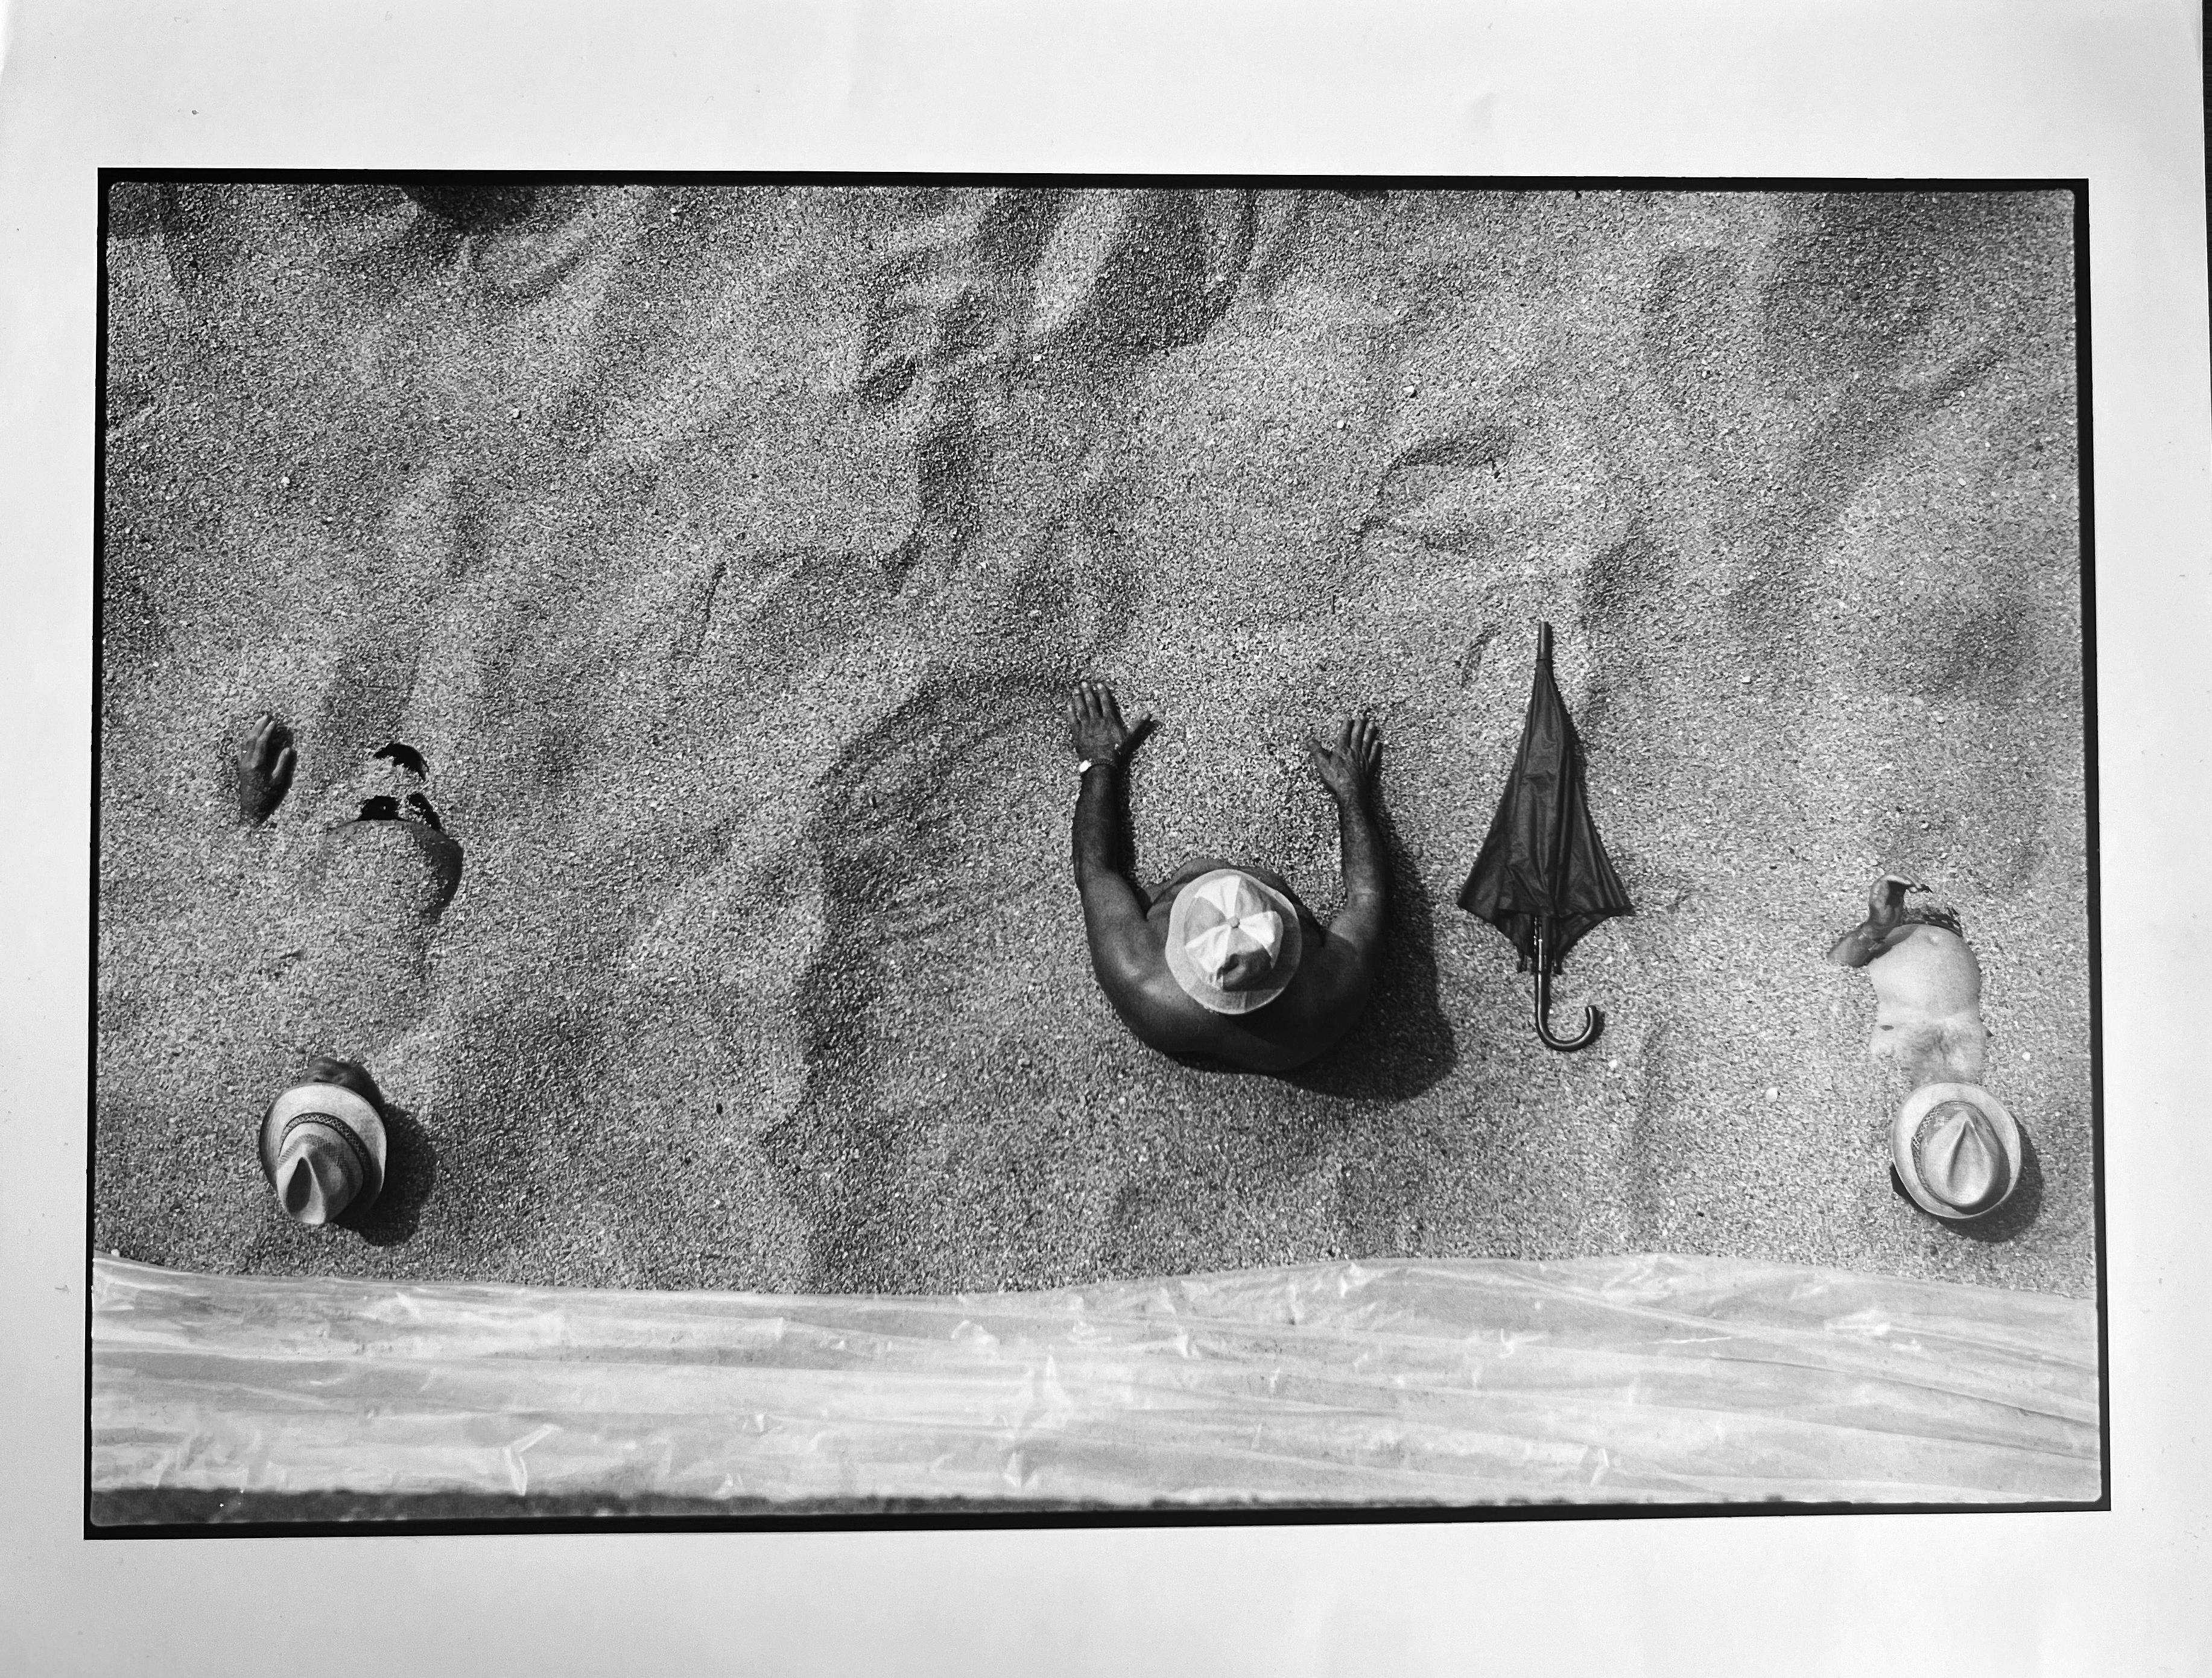 Beach II, Italy, 1984 by Leonard Freed is an 11" x 14" black and white photograph, a gelatin silver RC press print from the Freed archive, signed verso (on back of photograph) by the photographer, stamped/authenticated vintage print by the Freed